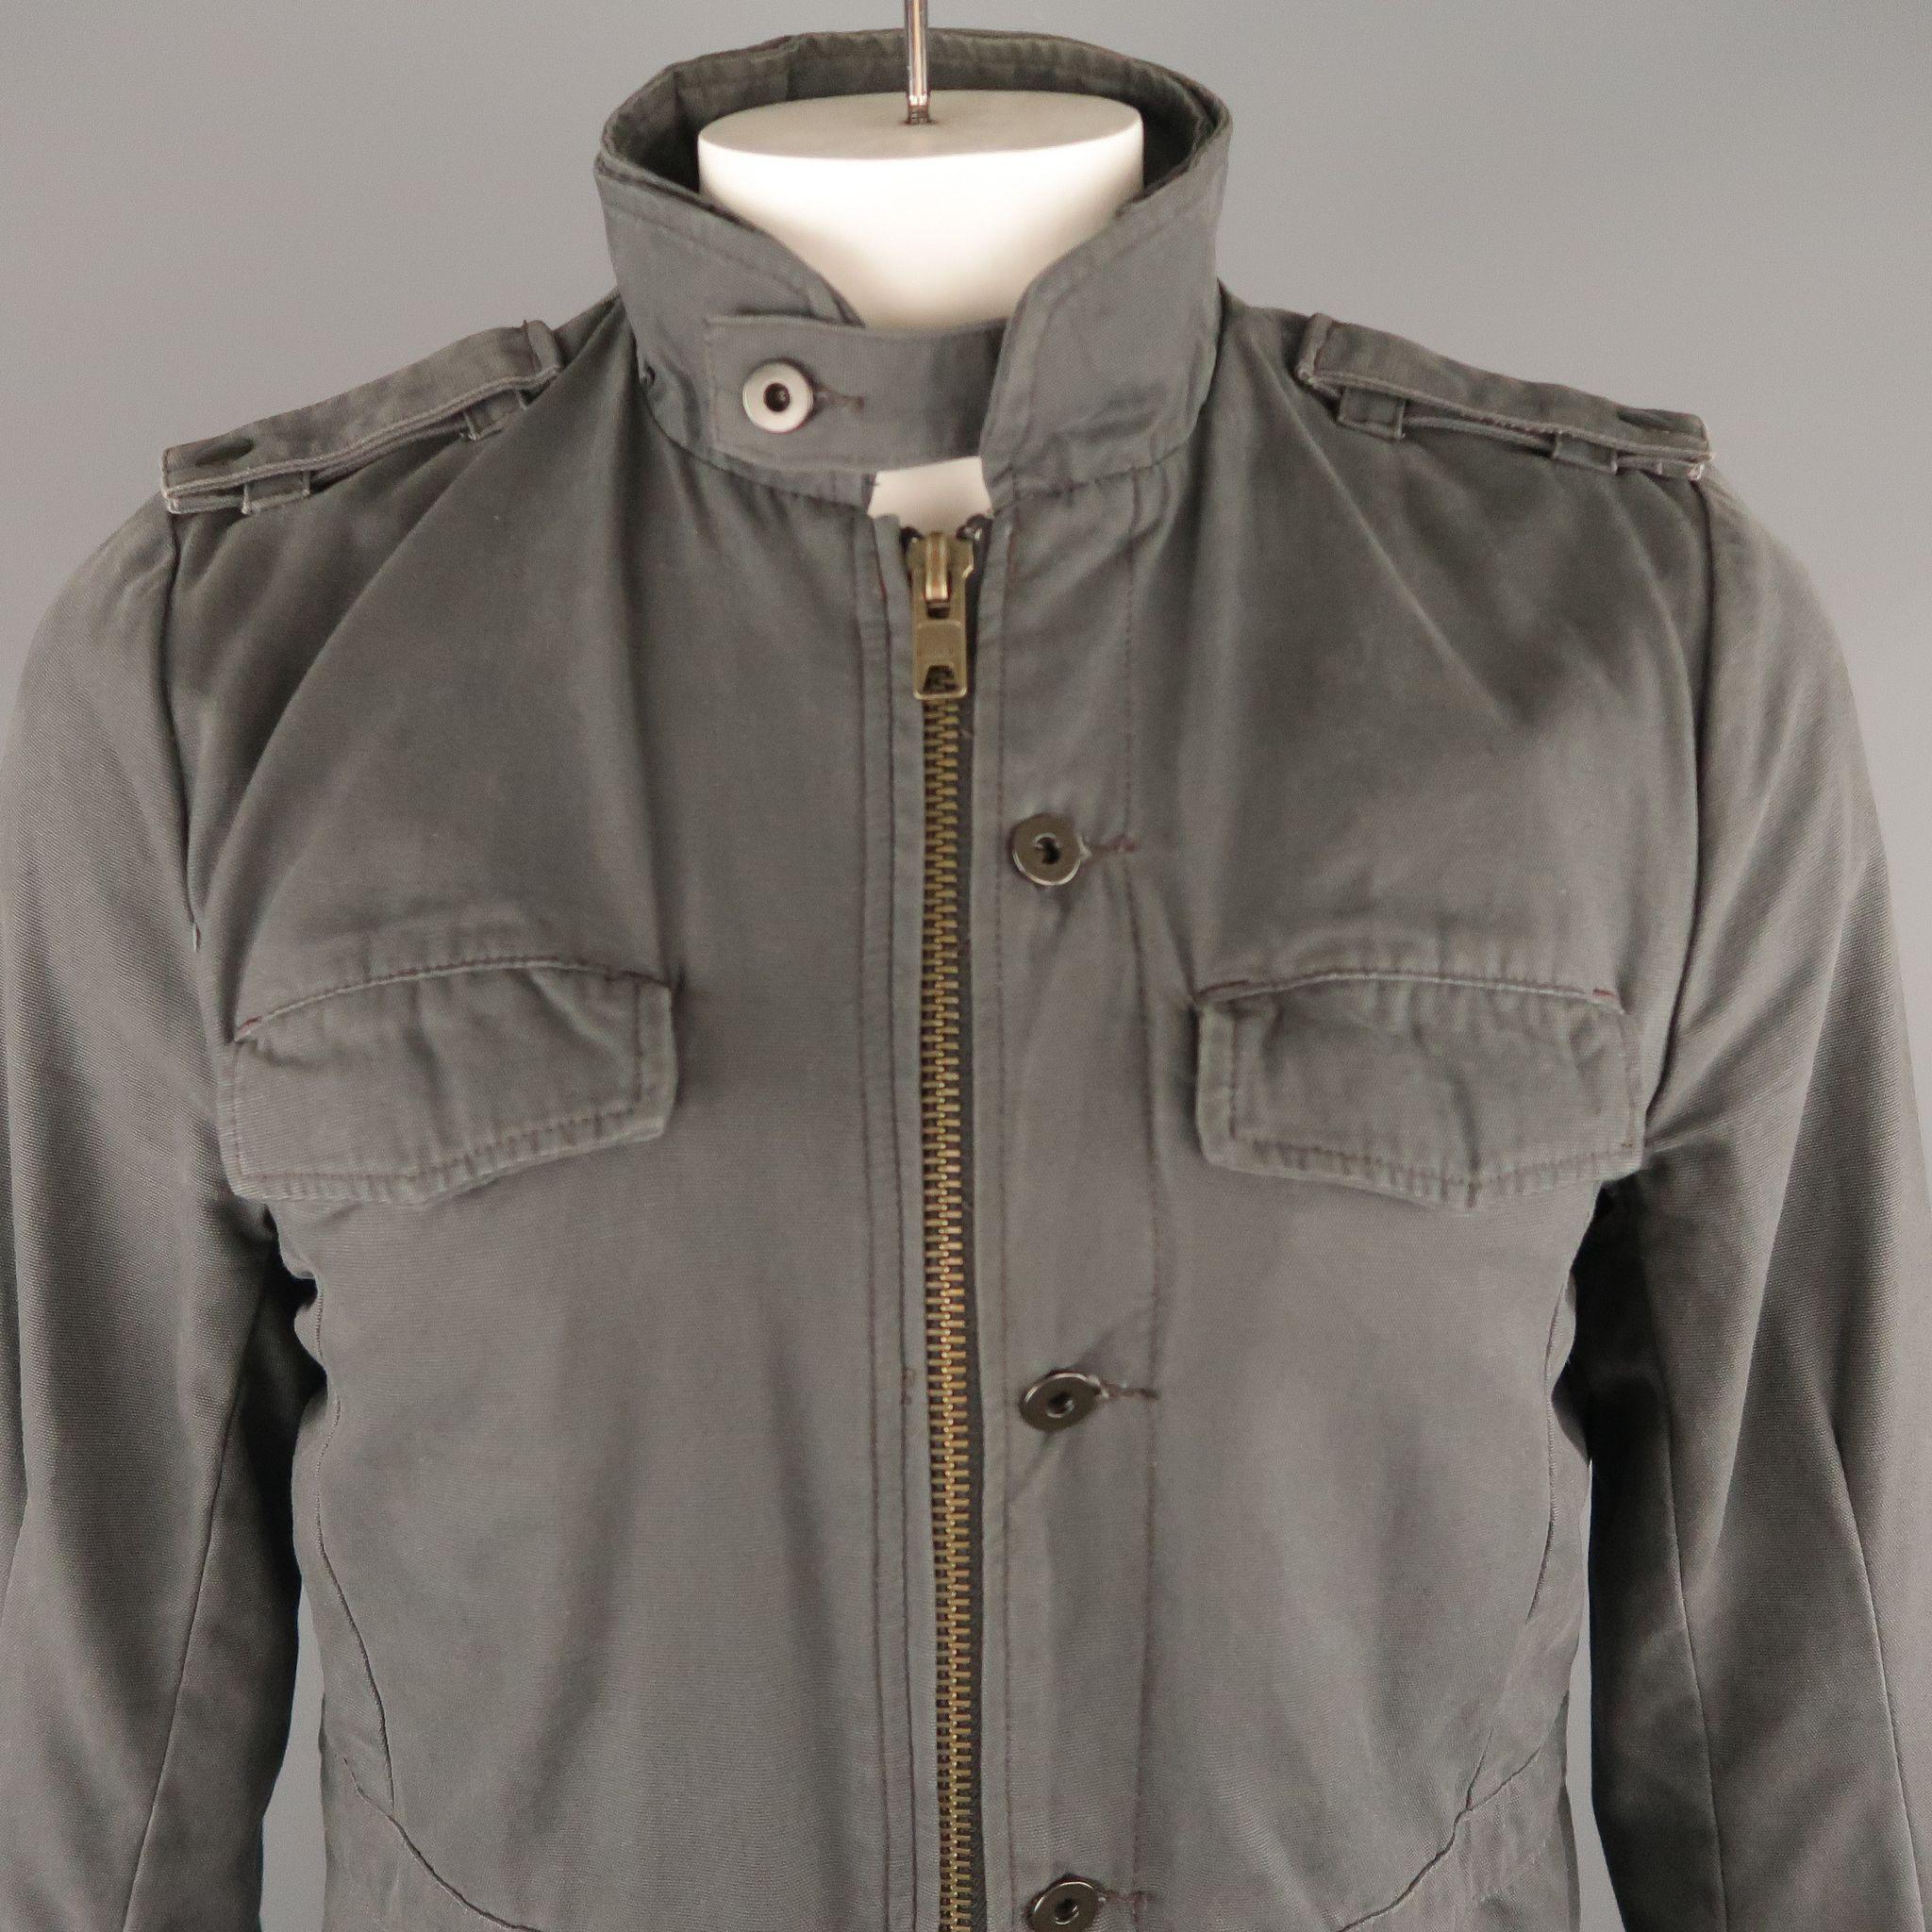 NICE COLLECTIVE  Military Style Jacket comes in a dark grey tone in a solid cotton material, with a double high collar, epaulettes, flap and slit pockets, zip and buttons. Made in USA.
 
Very Good Pre-Owned Condition.
Marked: L
 
Measurements:
